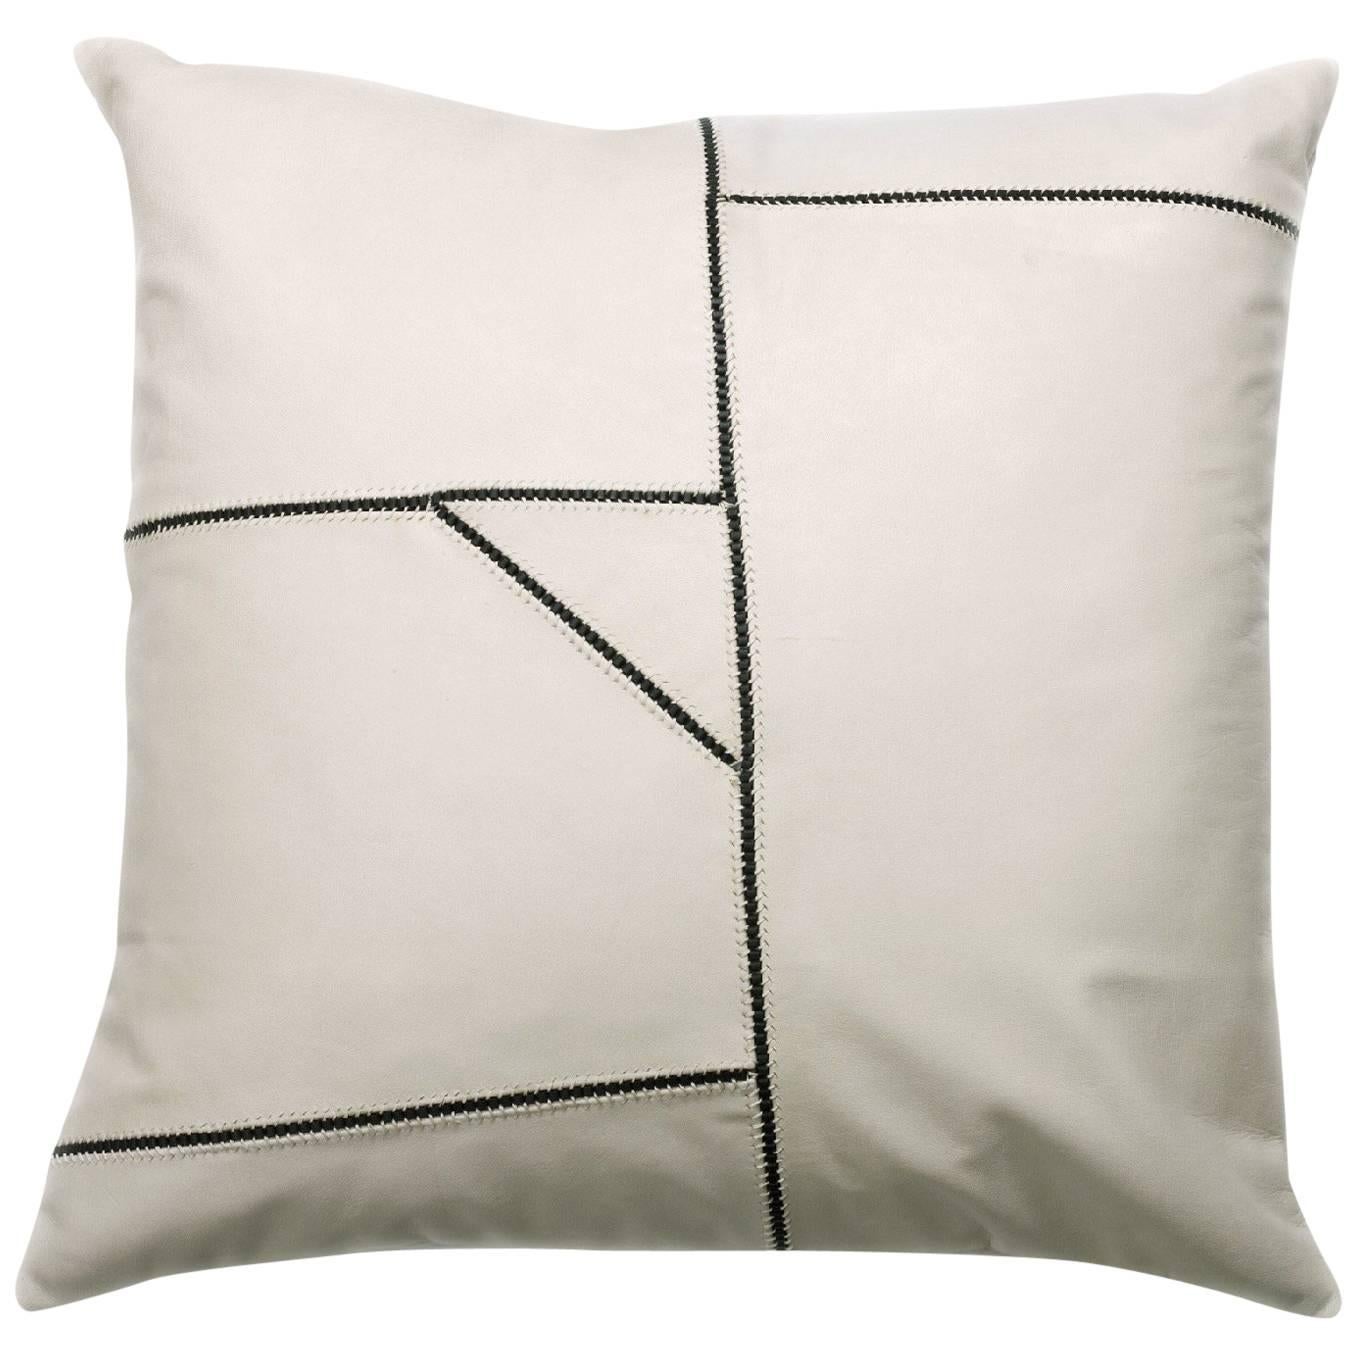 Matte Cream Leather with Chain Detail Pillow